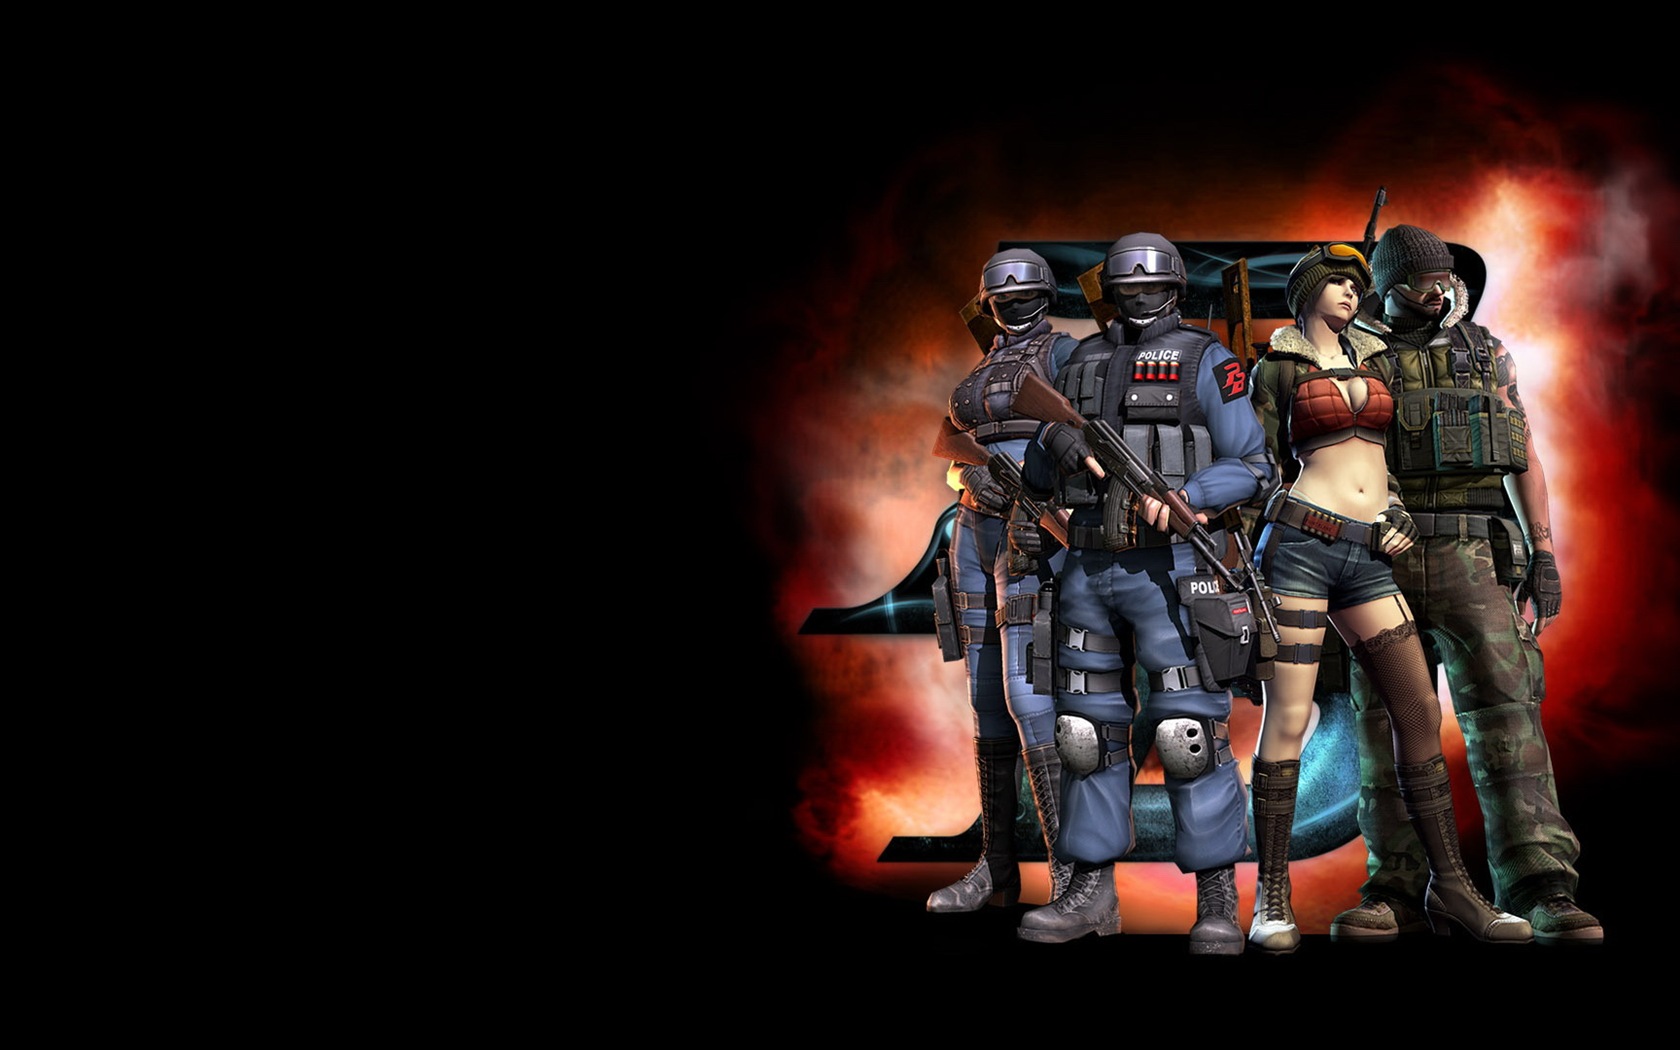 Point Blank HD game wallpapers #14 - 1680x1050